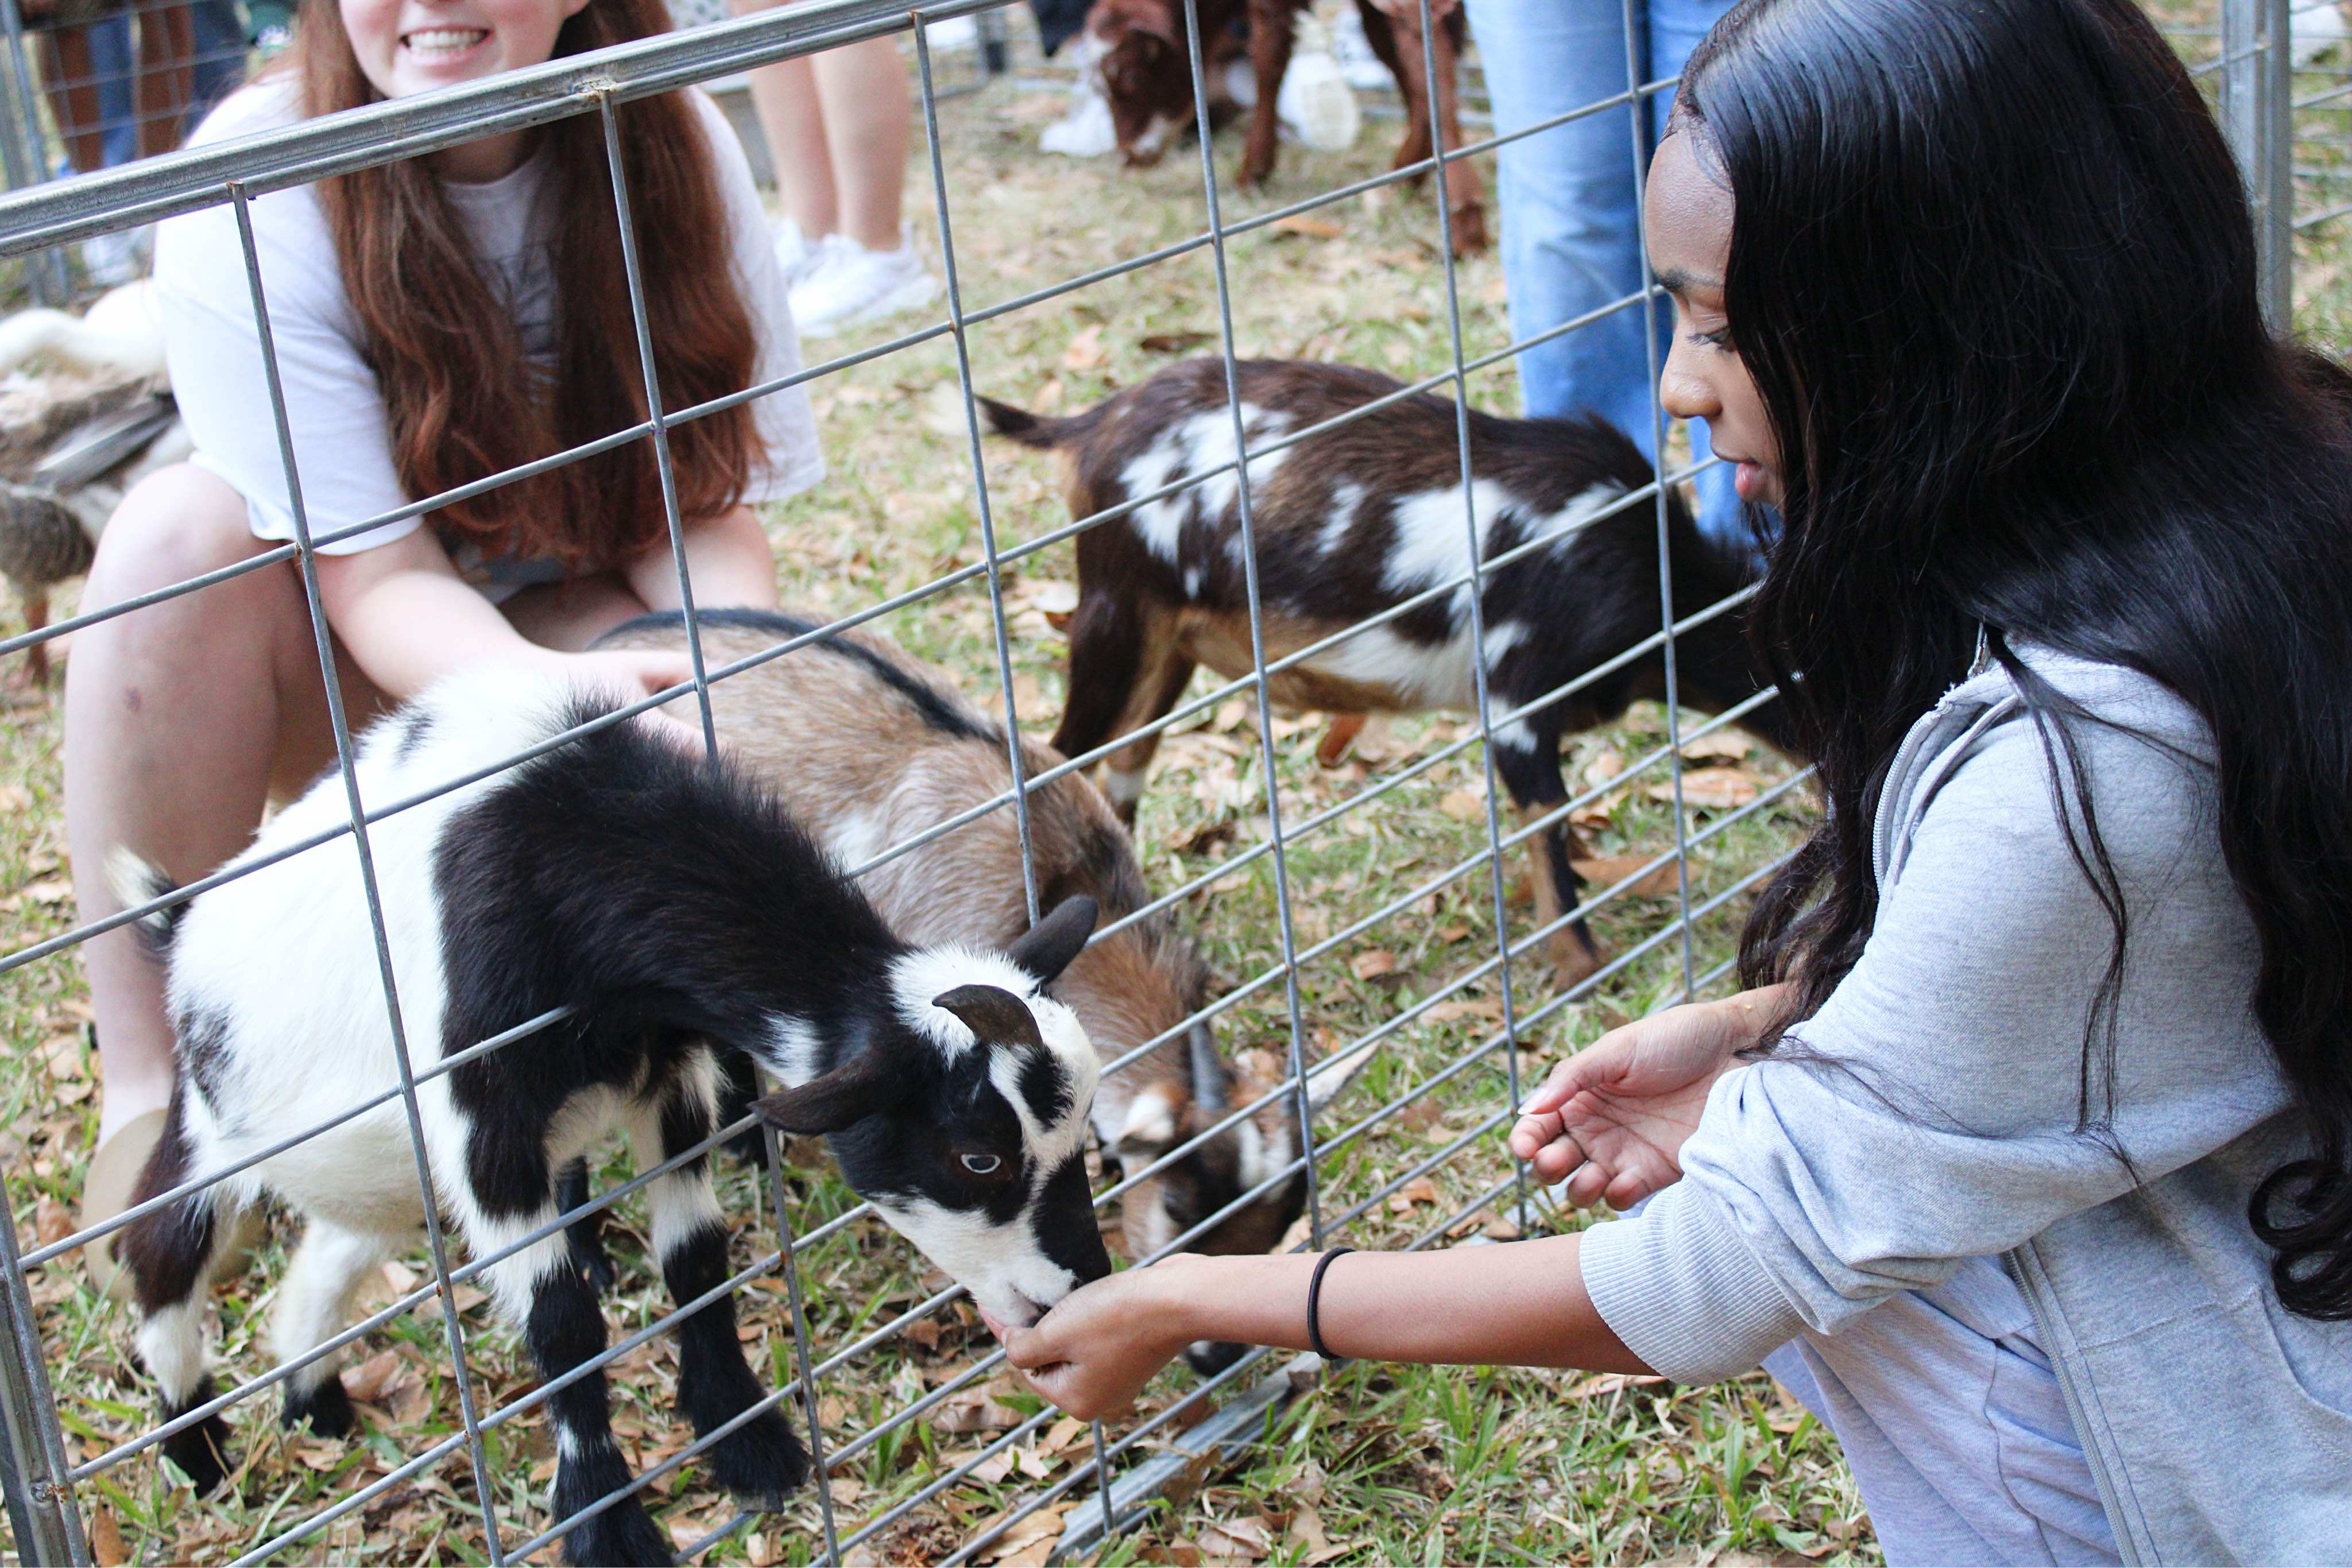 Student feeding a goat at a Blake Hall event.